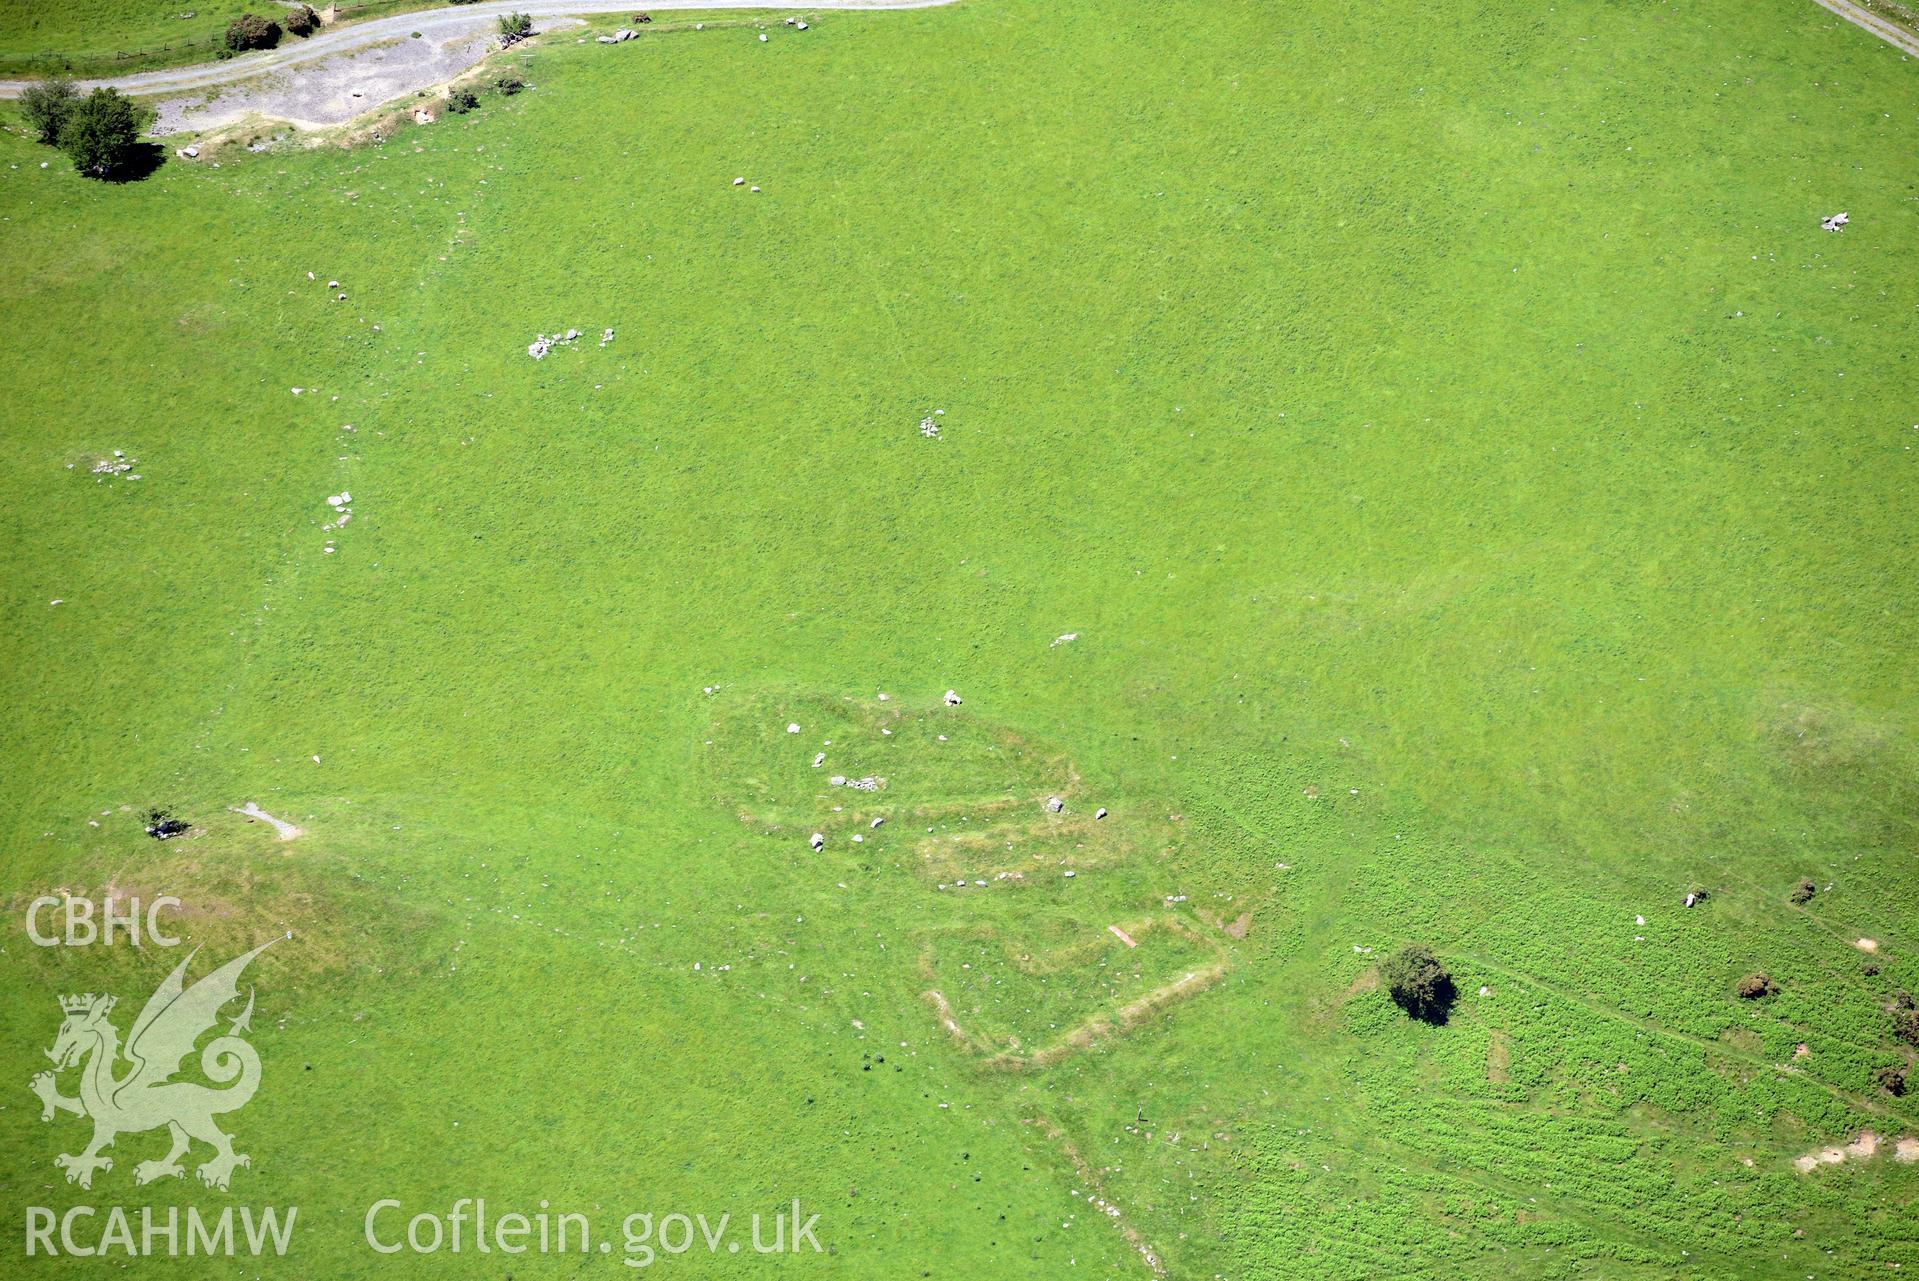 The deserted Penlandoppa farmstead, Troed y Rhiw, east of Pontrhydfendigaid on the edge of the Cambrian Mountains. Oblique aerial photograph taken during the Royal Commission's programme of archaeological aerial reconnaissance by Toby Driver on 30th June 2015.